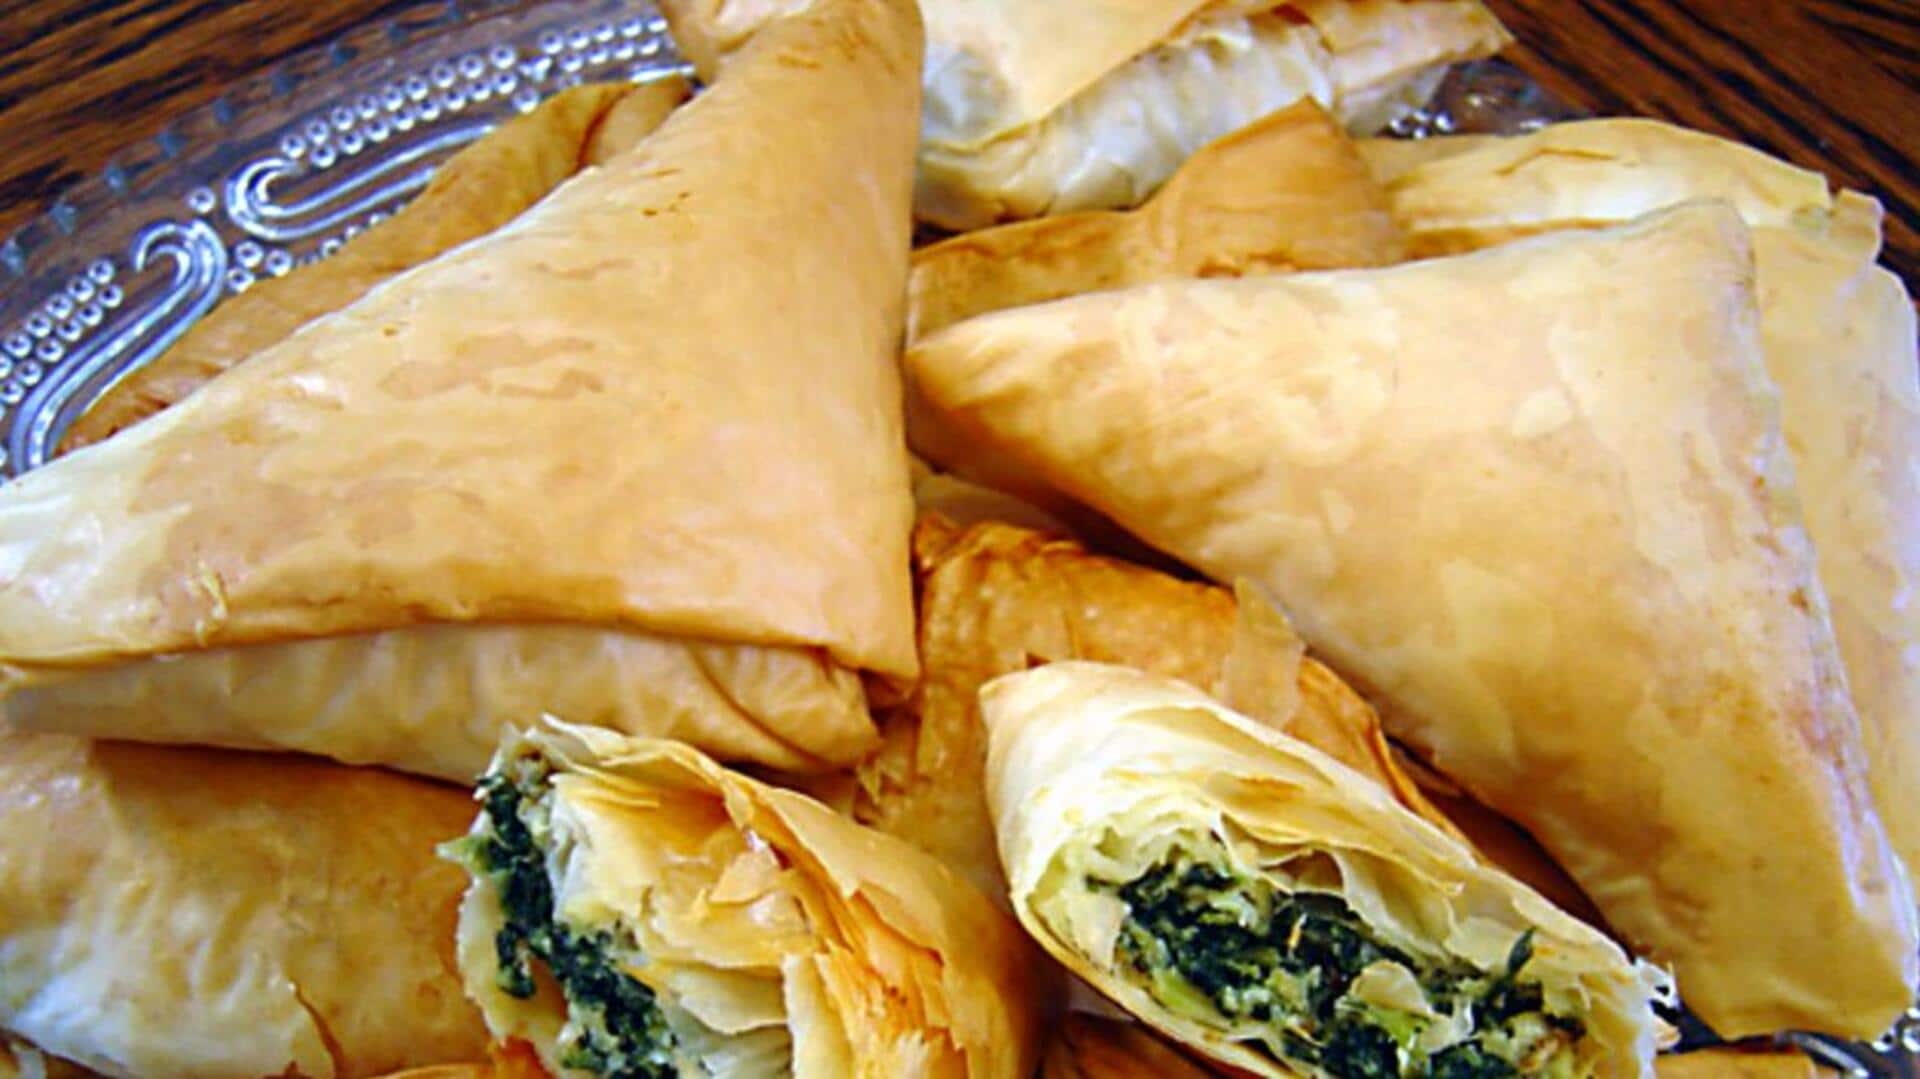 Try this vegan spanakopita triangles recipe at home